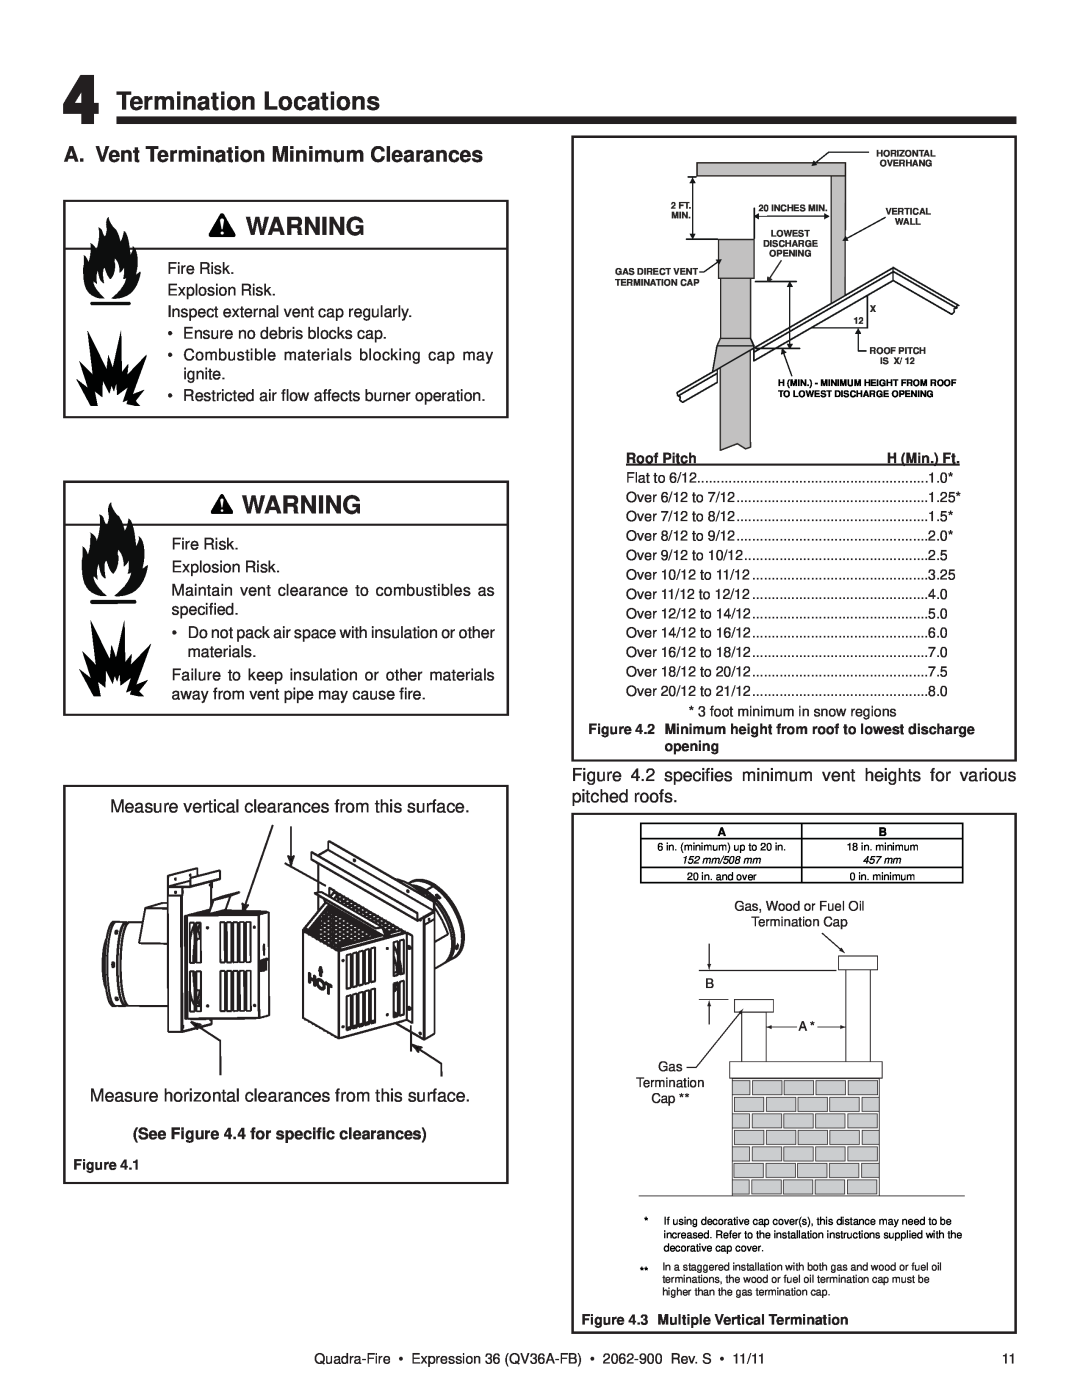 Quadra-Fire QV36A-FB Termination Locations, A. Vent Termination Minimum Clearances, See .4 for speciﬁc clearances, opening 